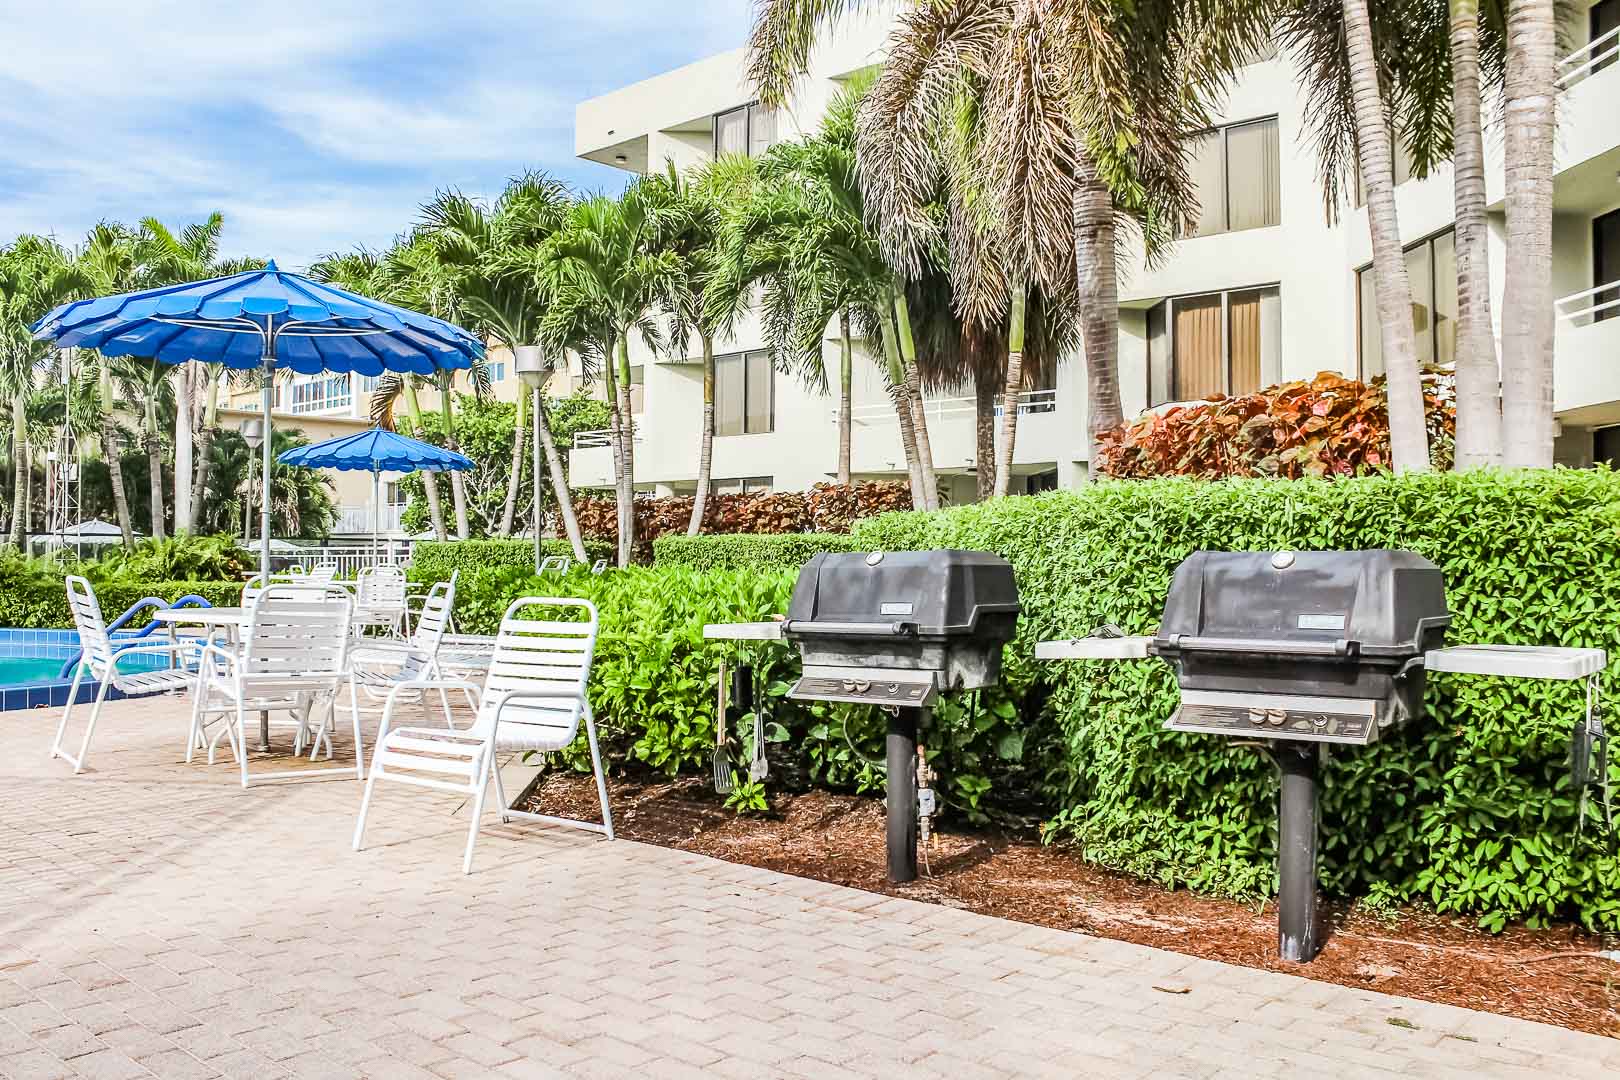 A pleasant pool area with BBQ Grills at VRI's Berkshire by the Sea in Florida.